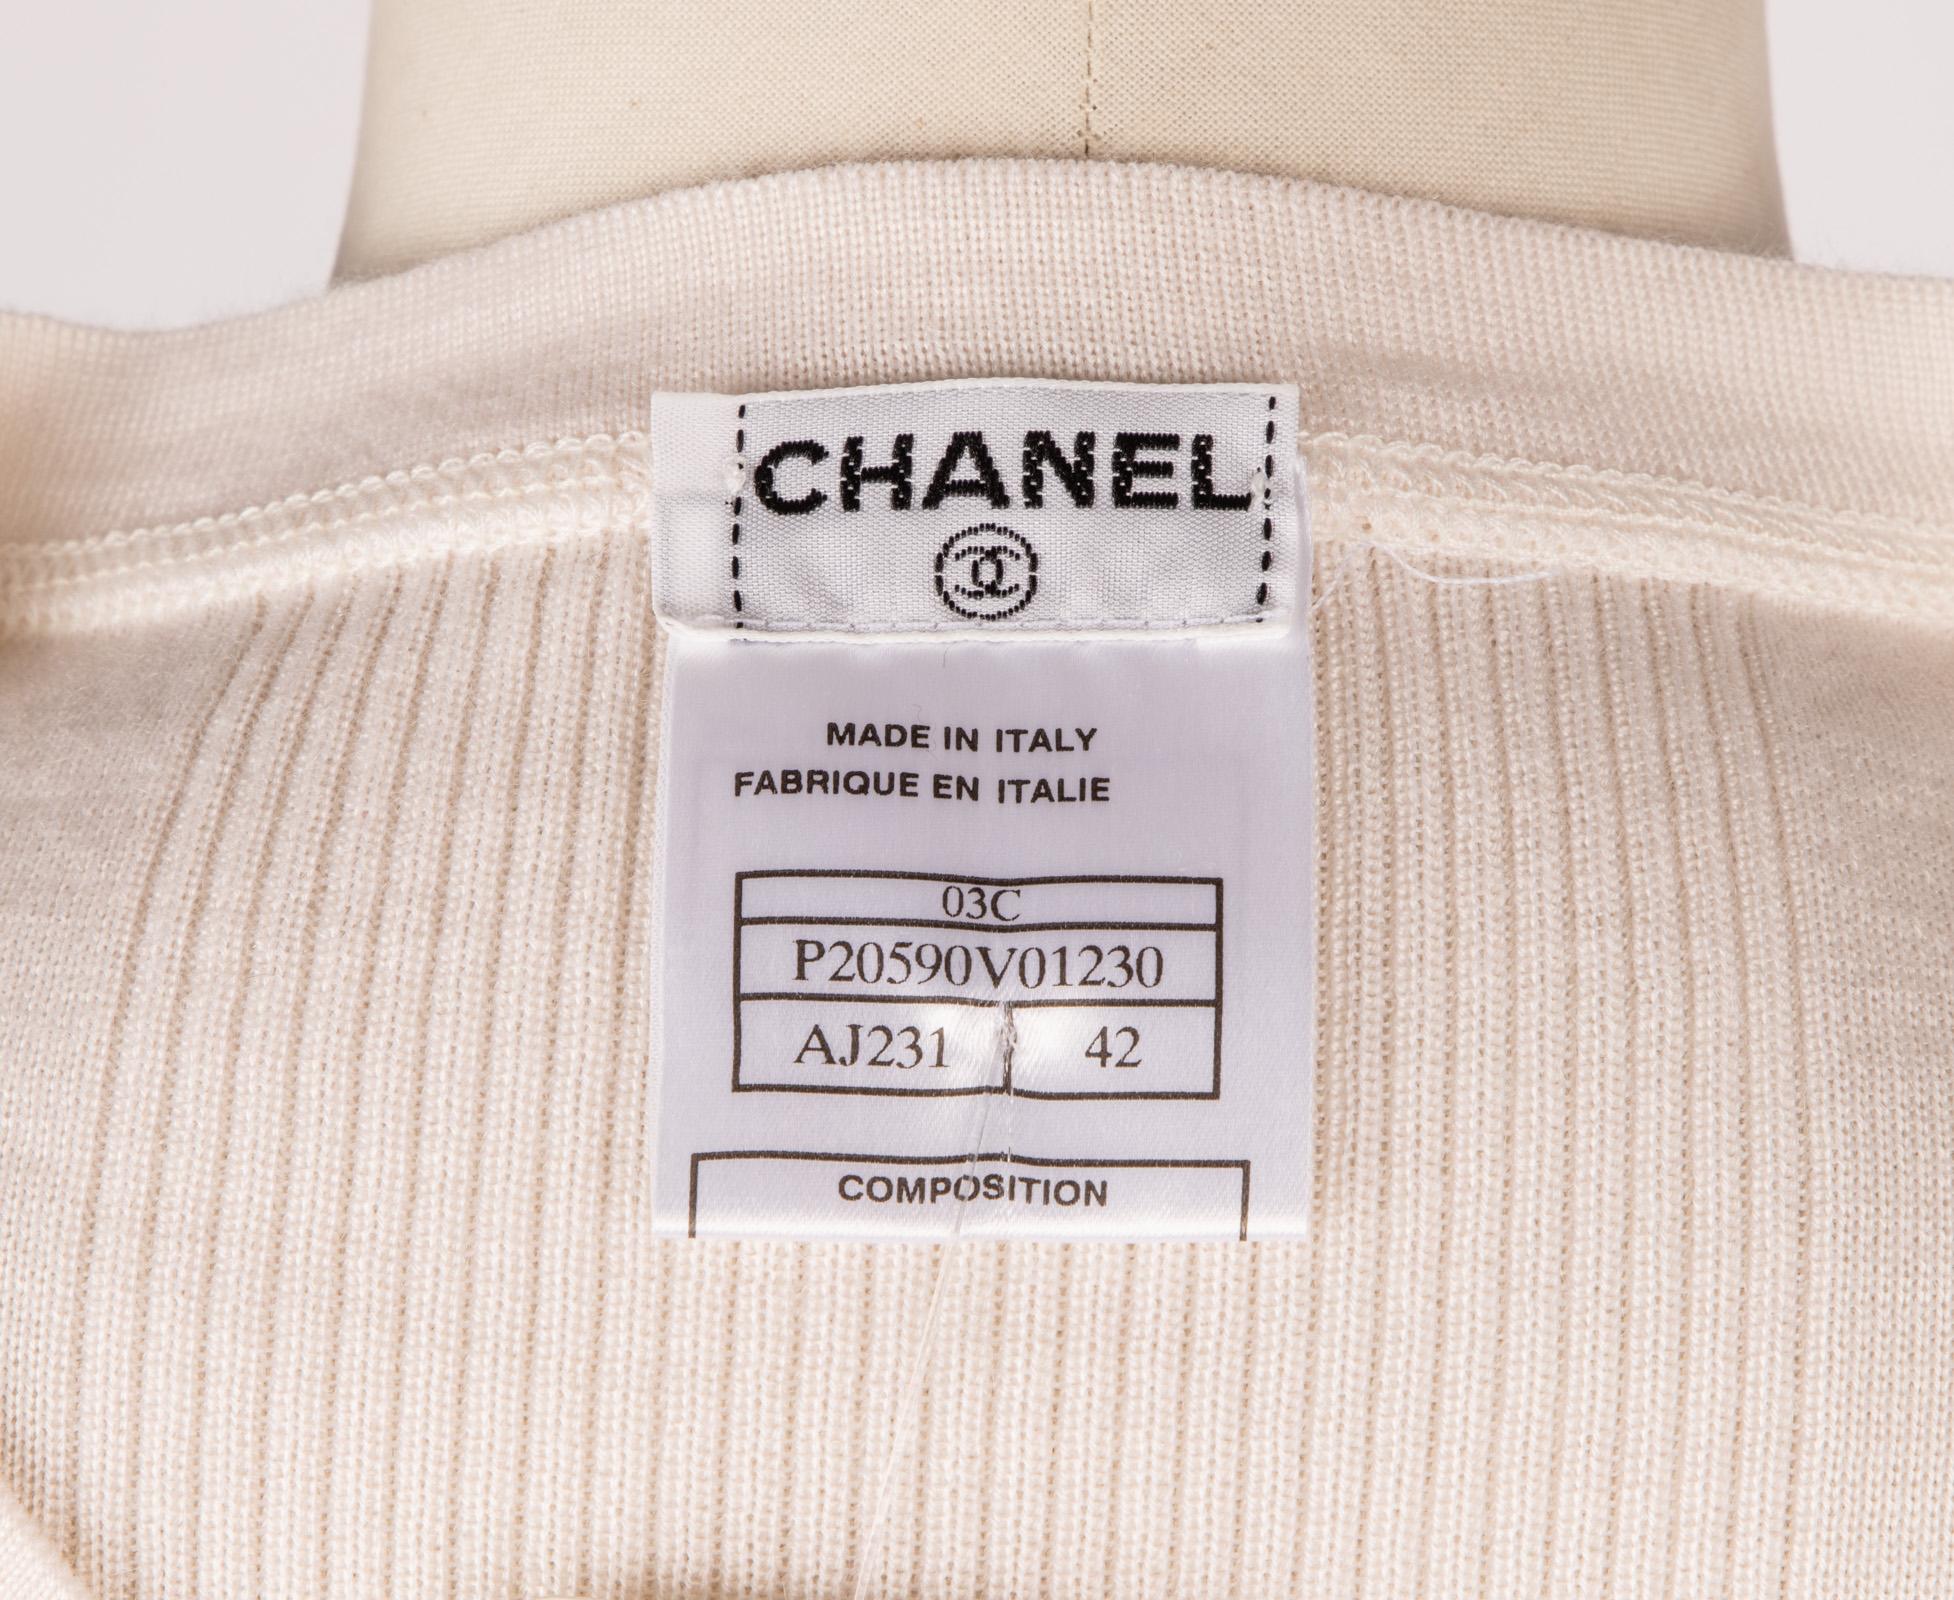 Chanel 03C Top Cream Cashmere Silk Soft and Light Pretty Detail 42 / 8 nwt 1